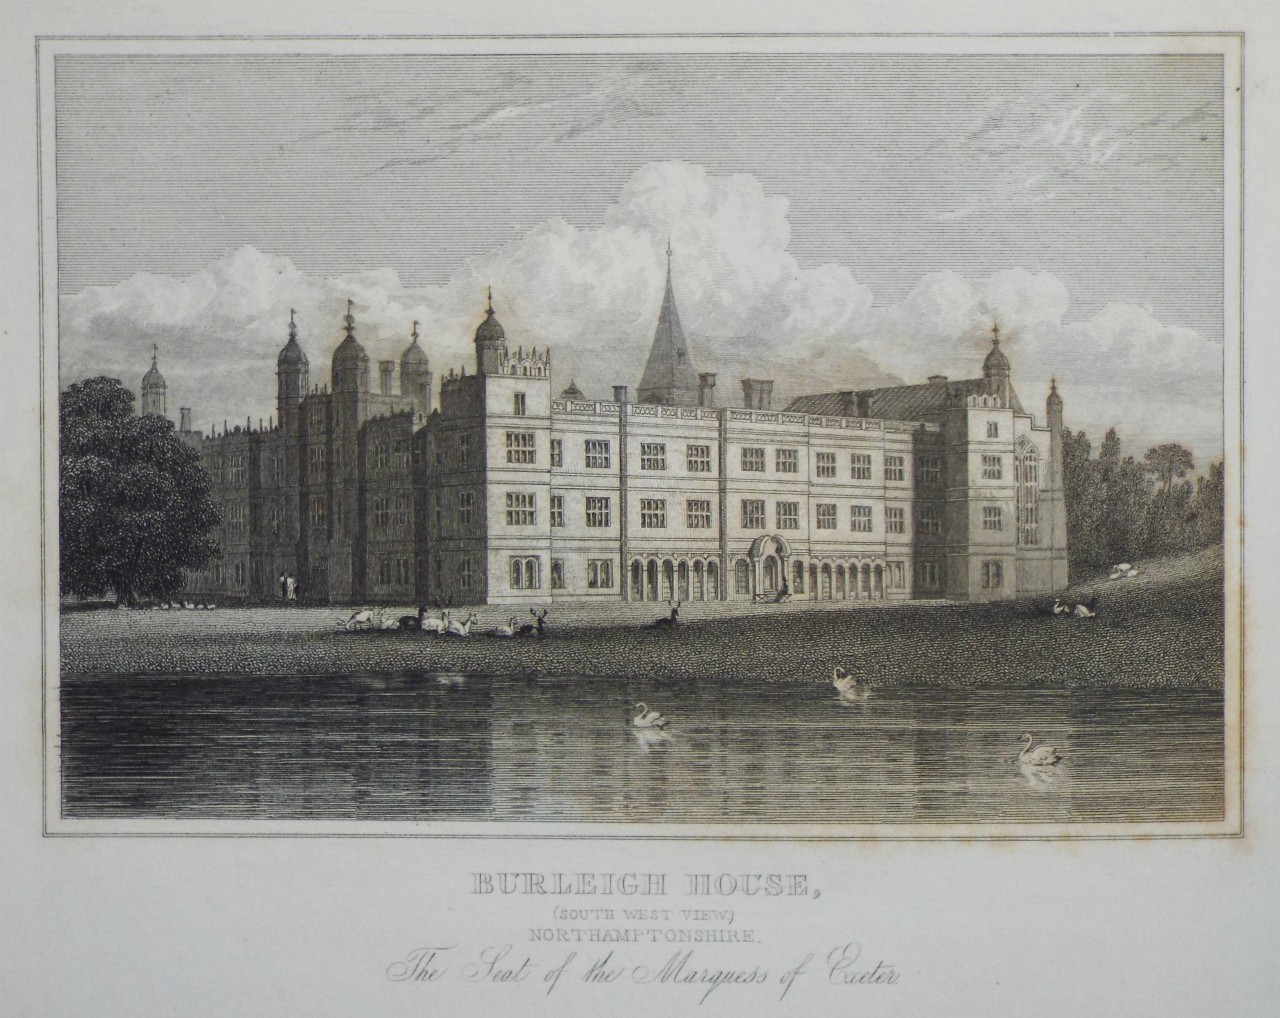 Print - Burleigh House, (South West View) Northamptonshire. The Seat of the Marquess of Exeter. - Radclyffe